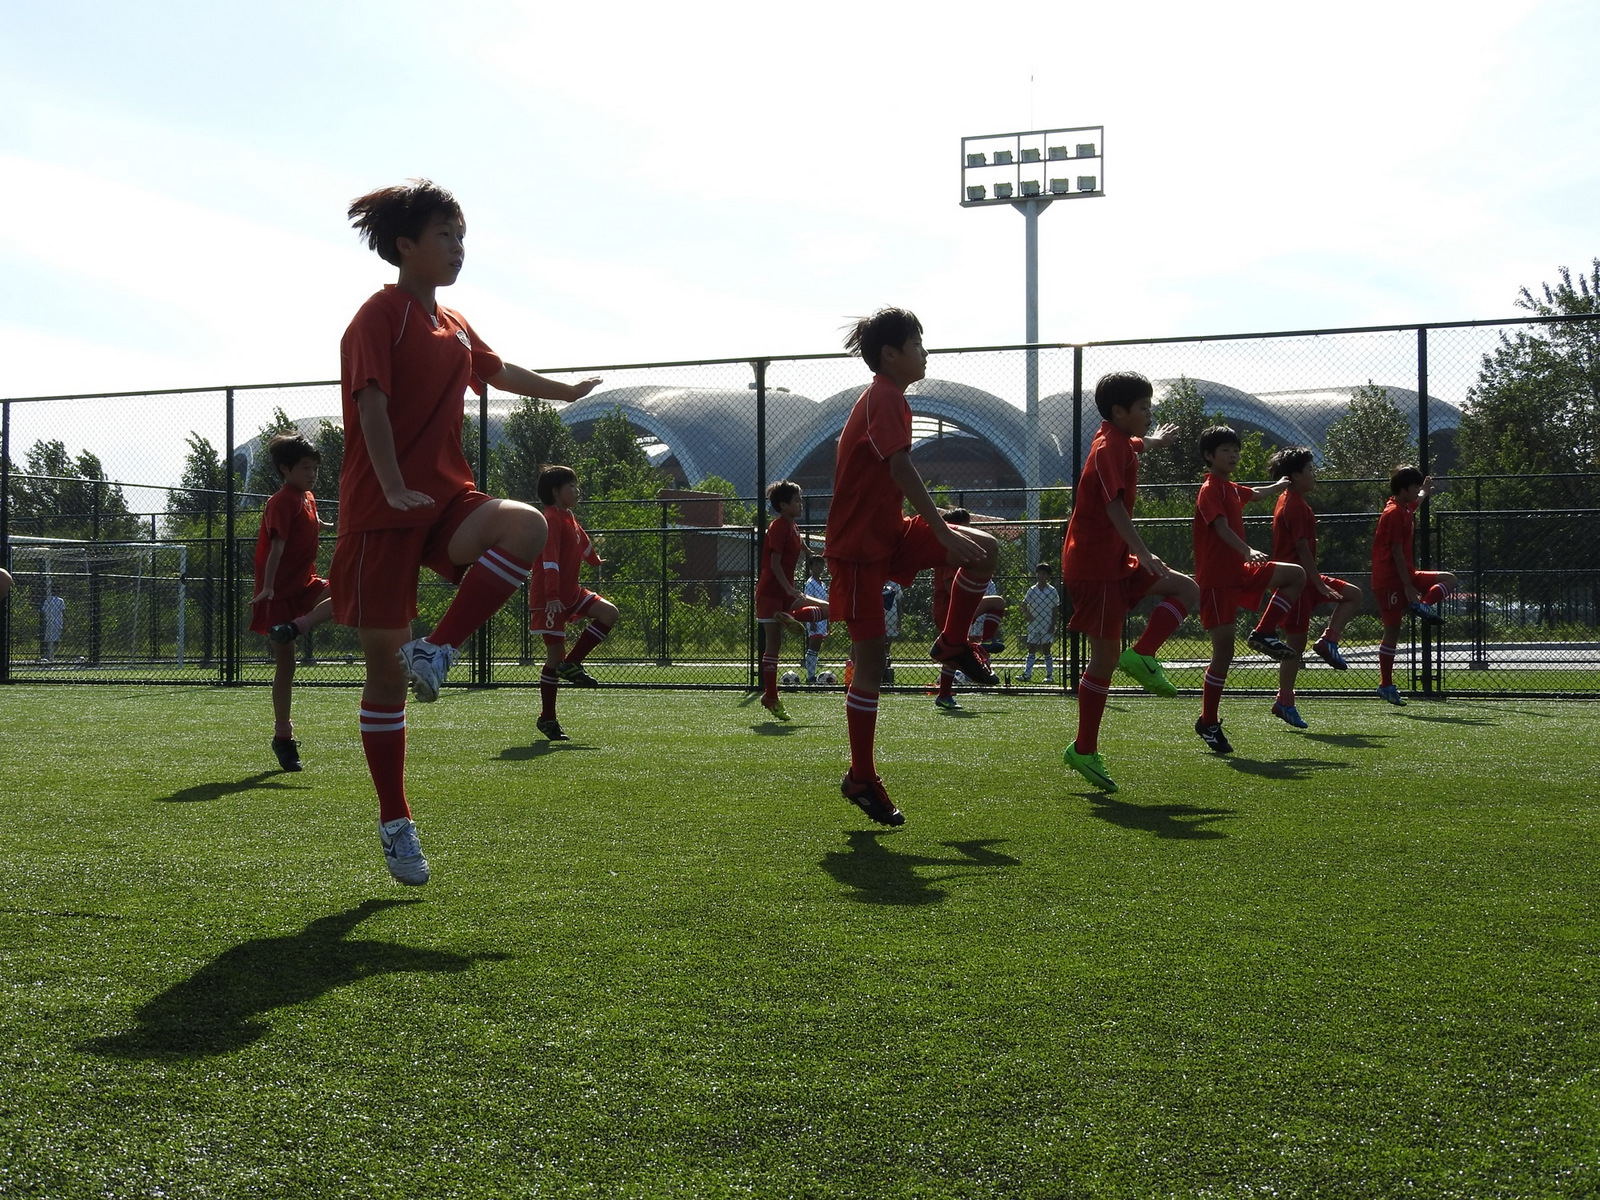 The Pyongyang International Football School opened in 2013. The complex includes a massive stadium and a school teaching all subjects, with football as a focus for the roughly 200 students. Different classes practised their skills outside, doing warm-up drills to energetic music. When years ago I lived in Korea's south, practicing Tae Kwan Do I warmed-up to similar drills.